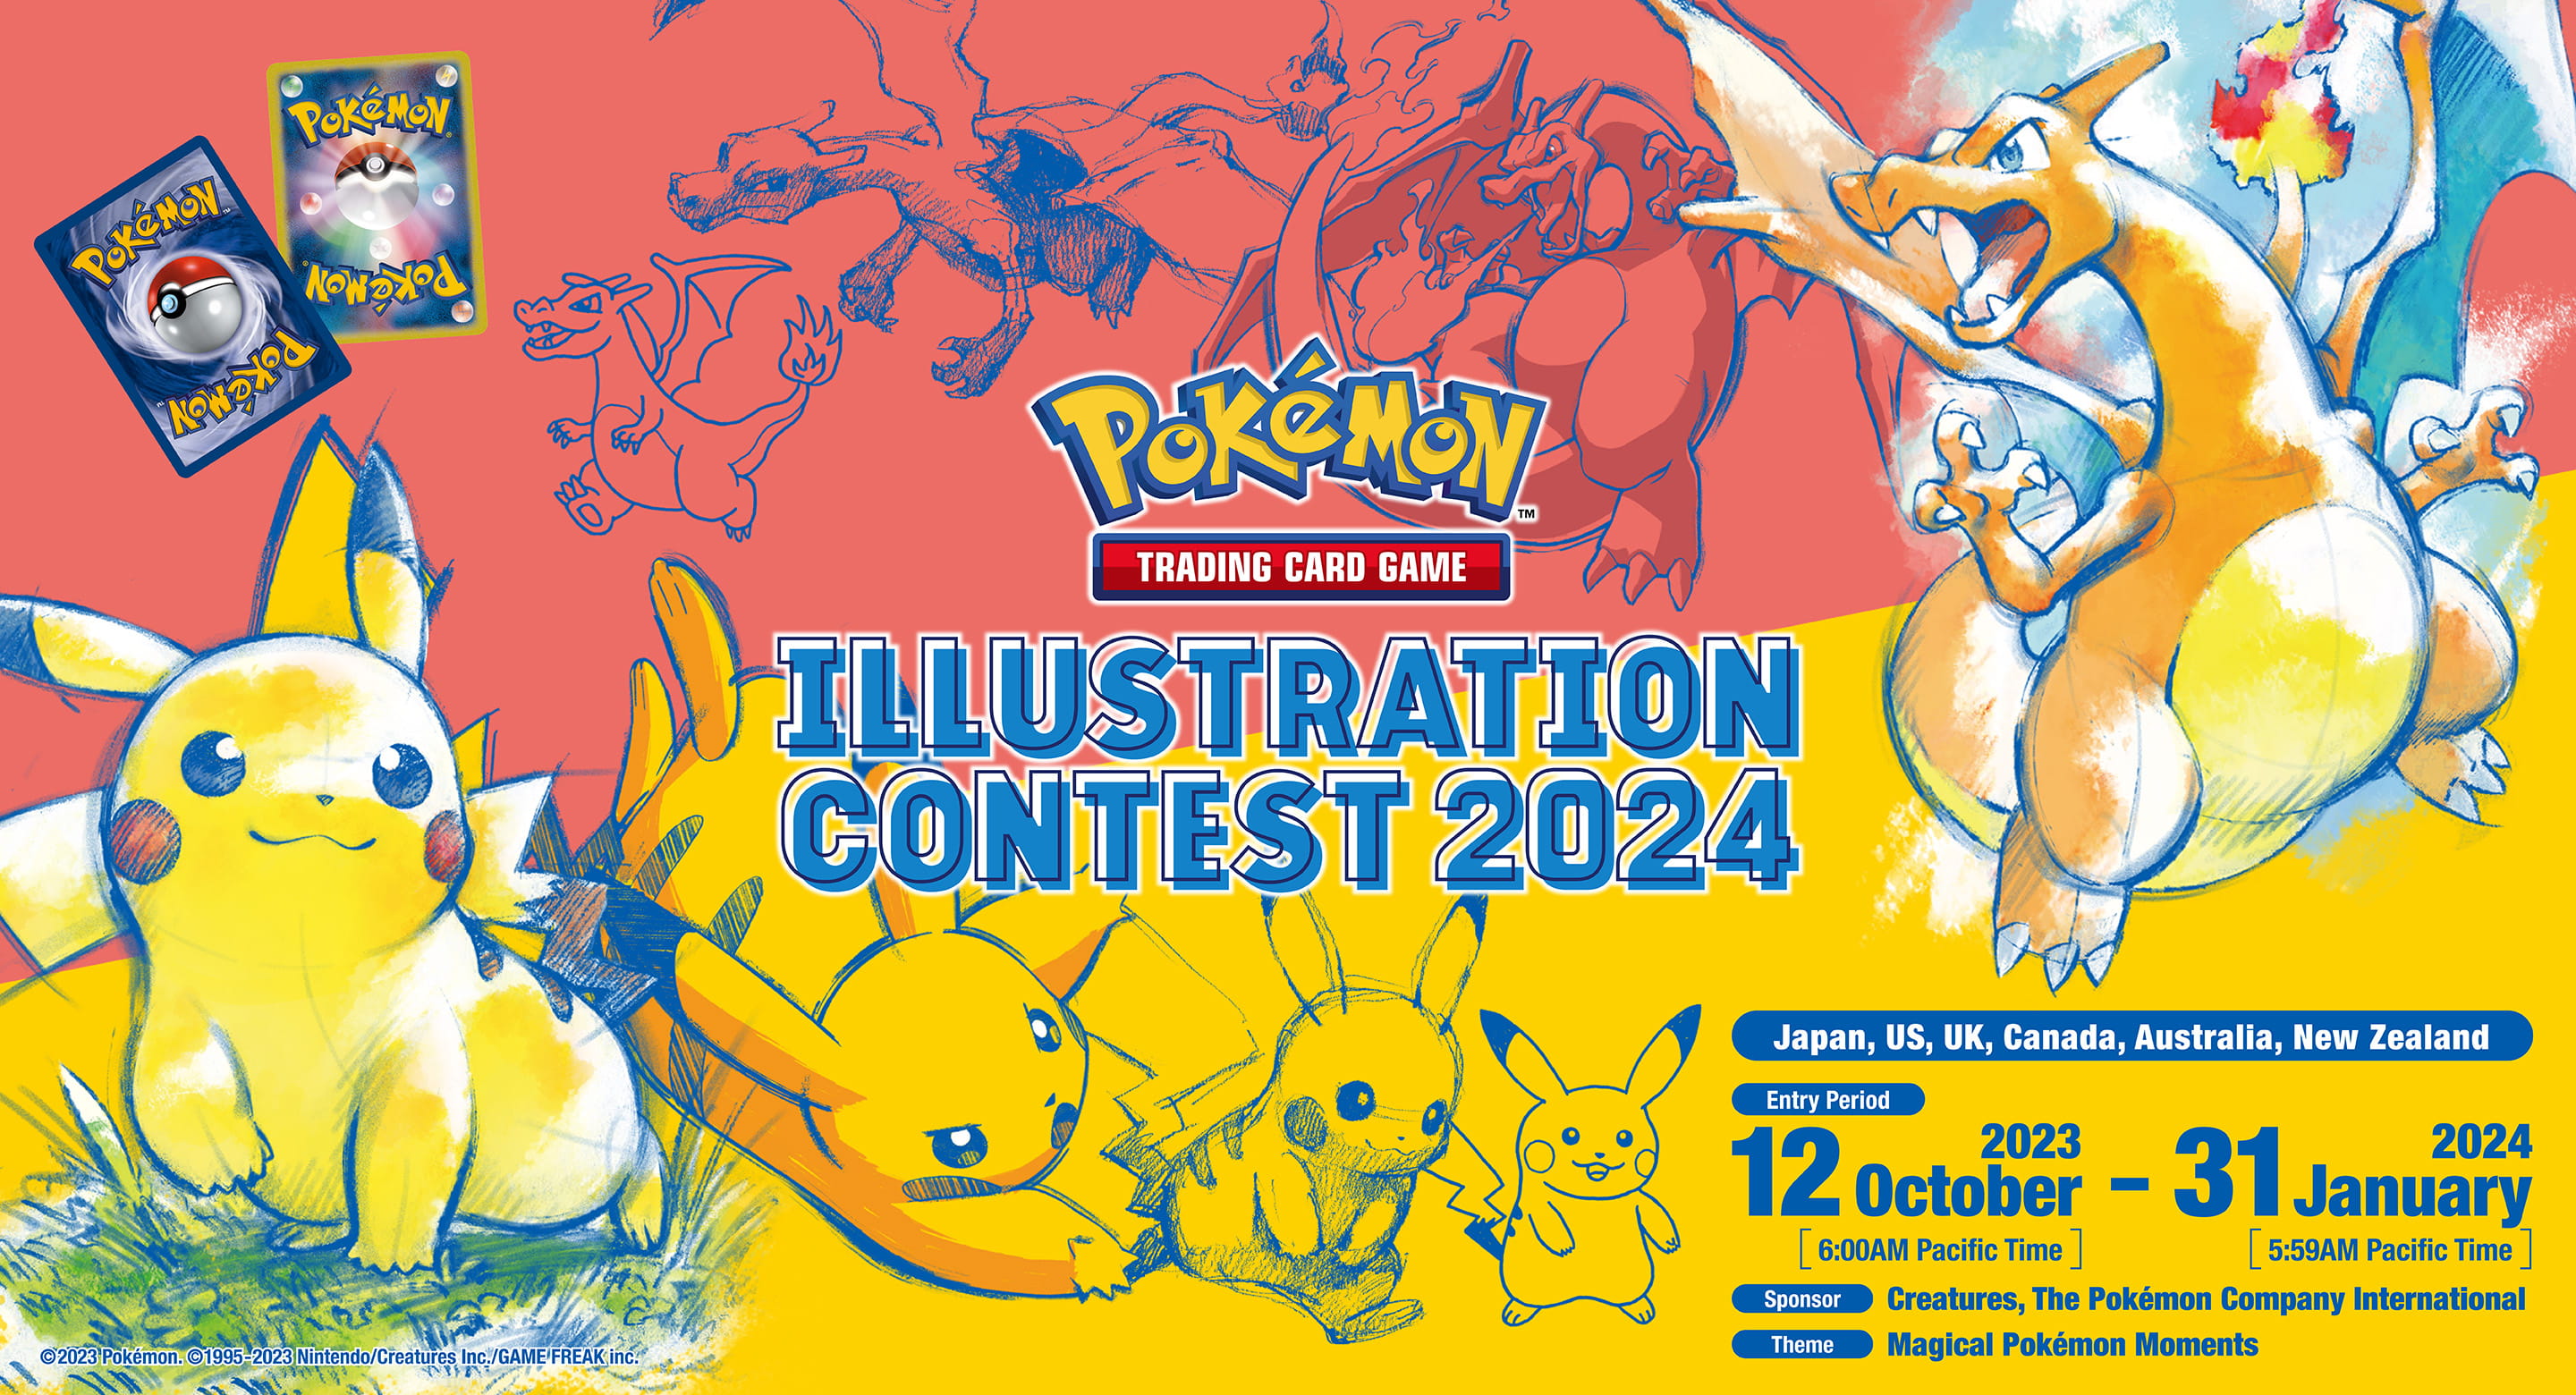 Pokémon Trading Card Game ILLUSTRATION CONTEST 2024. Japan, US, Canada, Australia, New Zealand. Entry Period: From October 12, 2023 (6:00AM Pacific Time) to January 31, 2024 (5:59AM Pacific Time) Sponsor: Creatures, The Pokémon Company International Theme: Magical Pokémon Moments ©2023 Pokémon. ©1995-2023 Nintendo/Creatures Inc./GAME FREAK Inc.